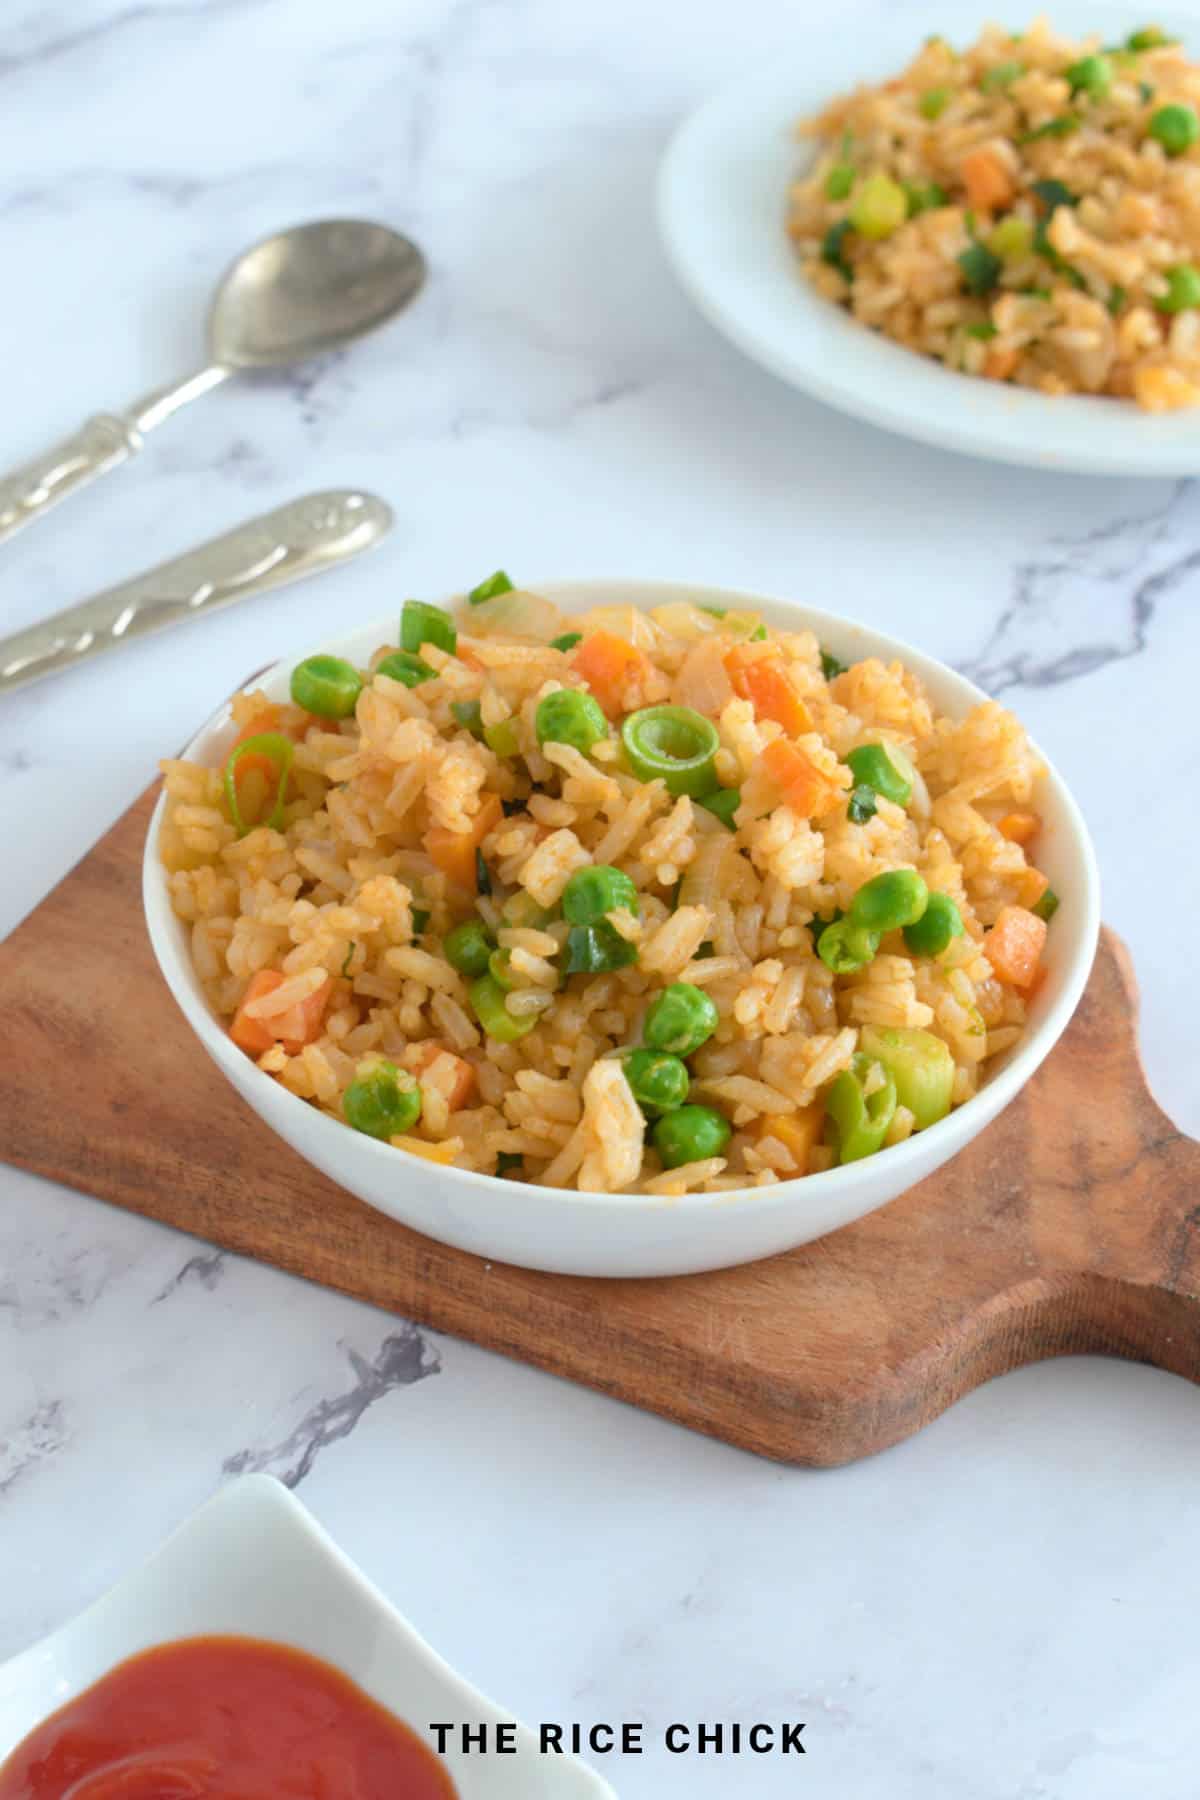 Fried rice in a bowl on a wooden board.